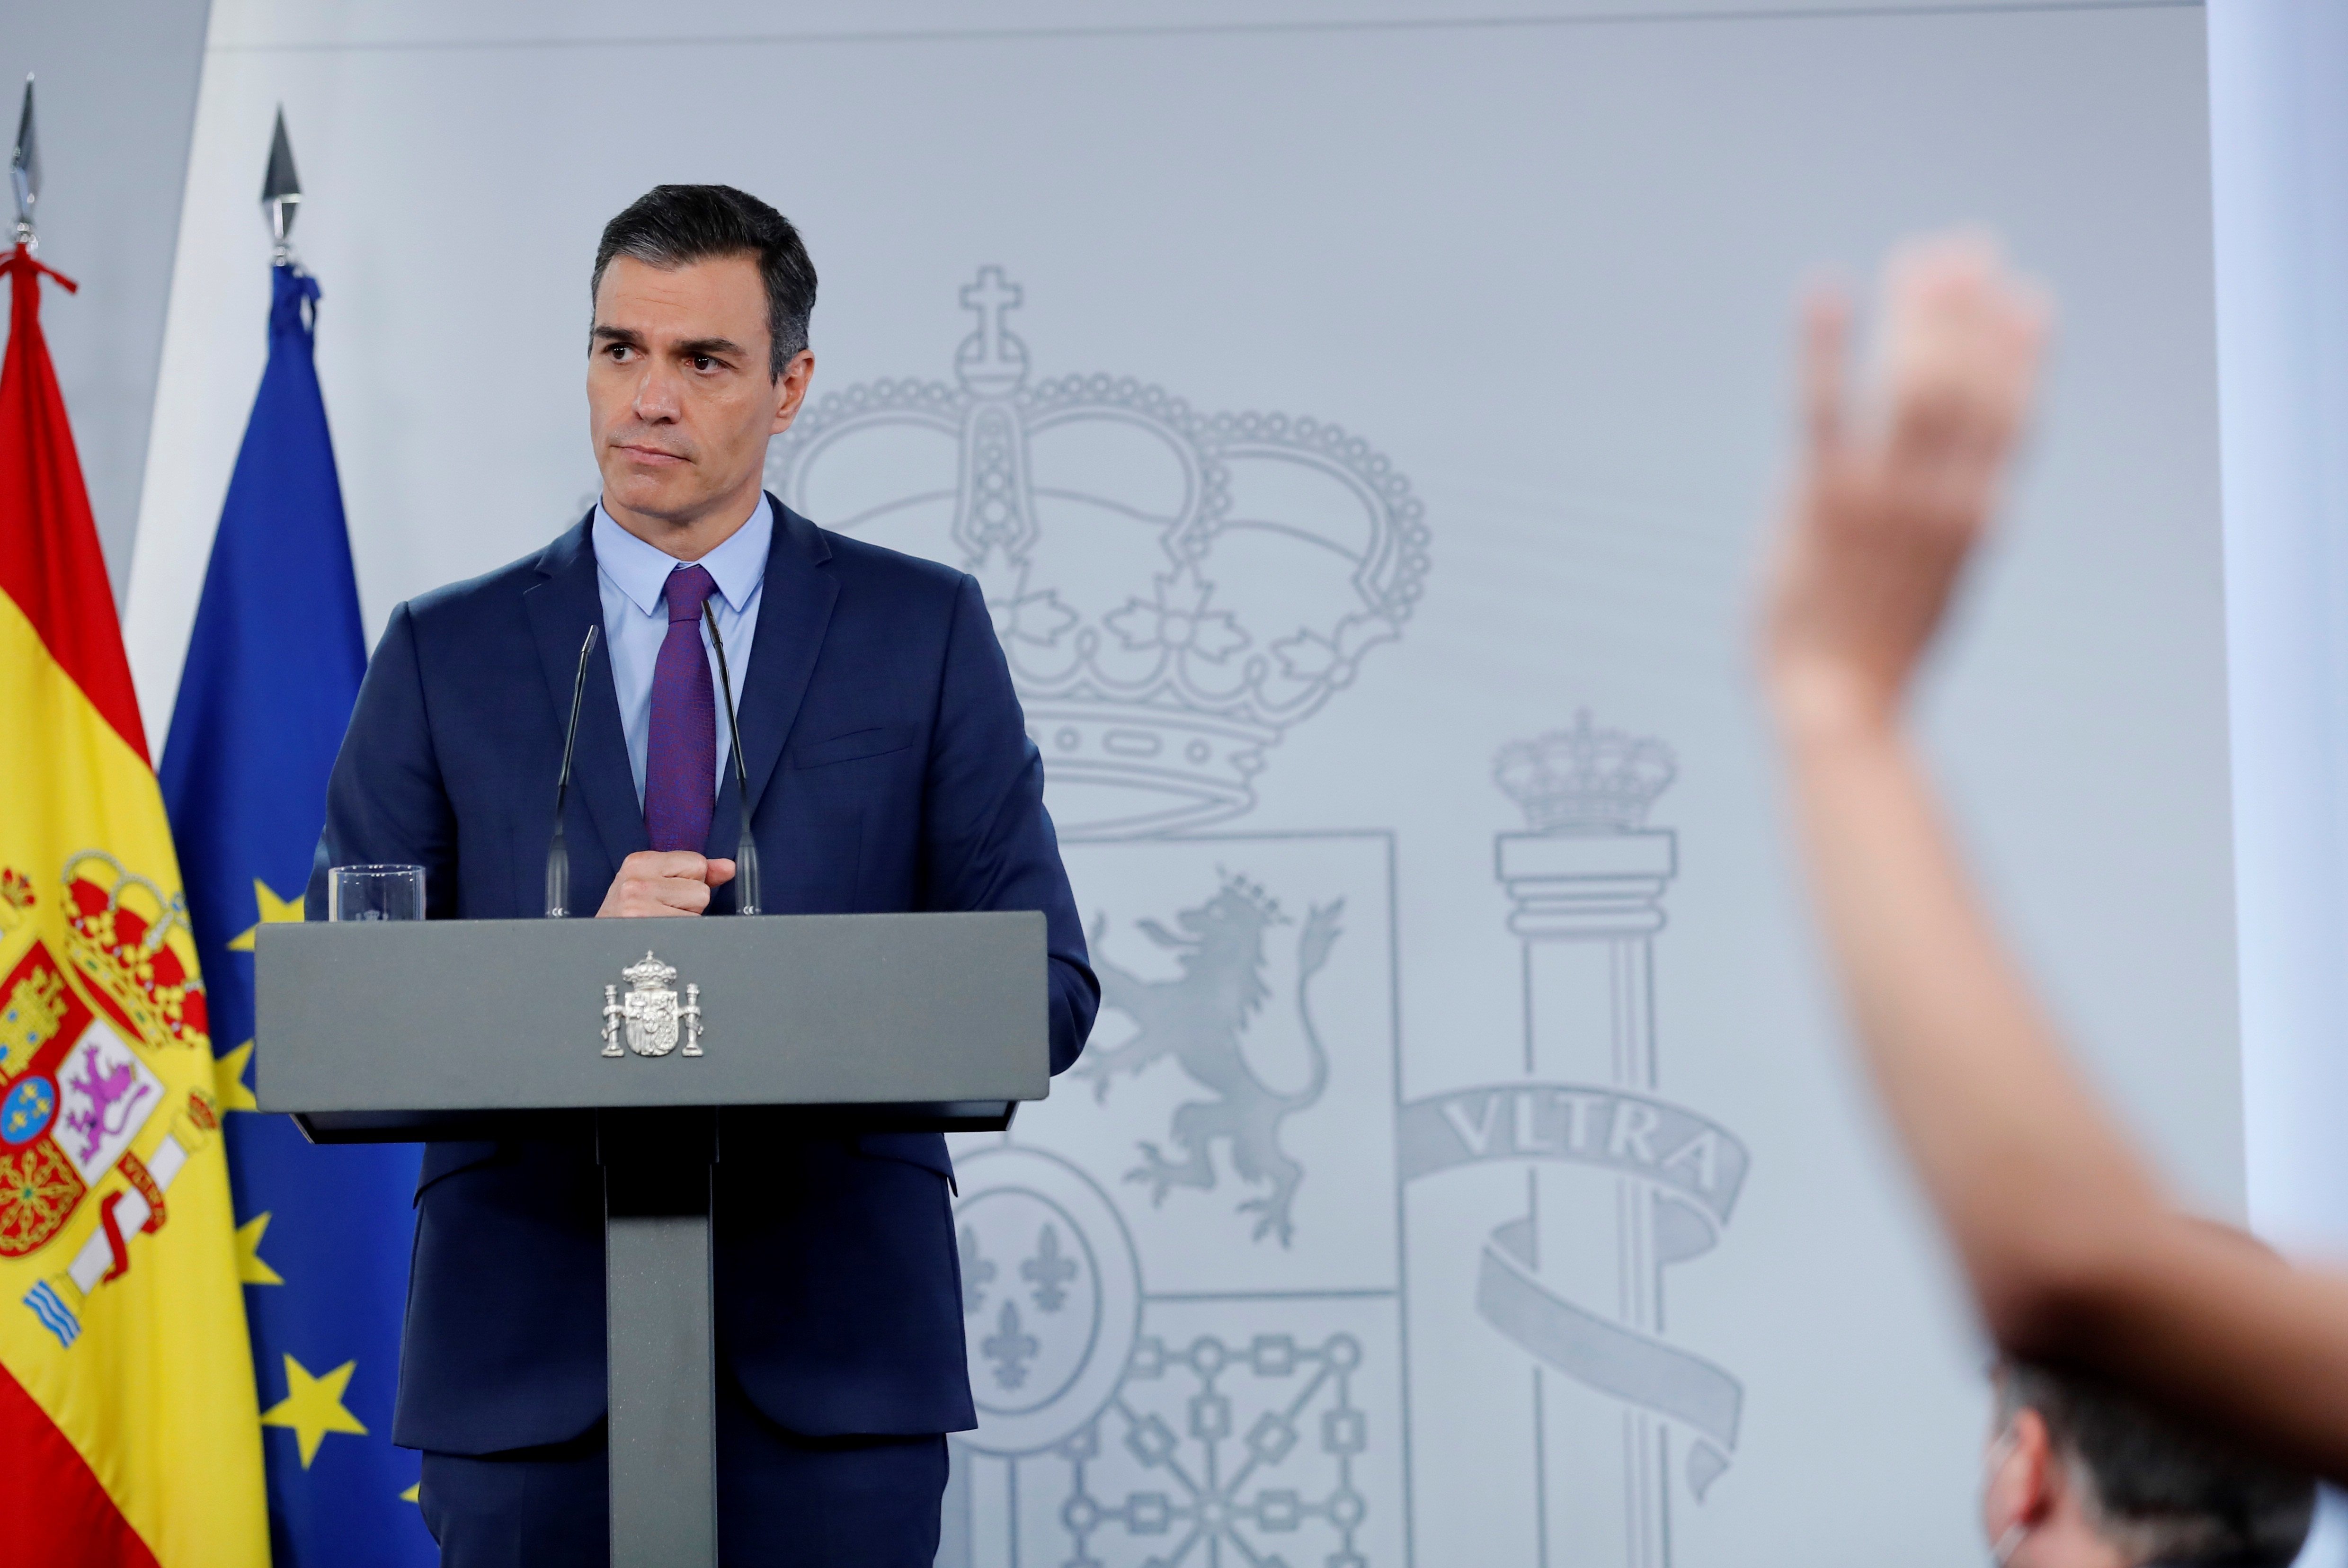 Spanish PM defends the monarchy and evades questions on Juan Carlos I's flight